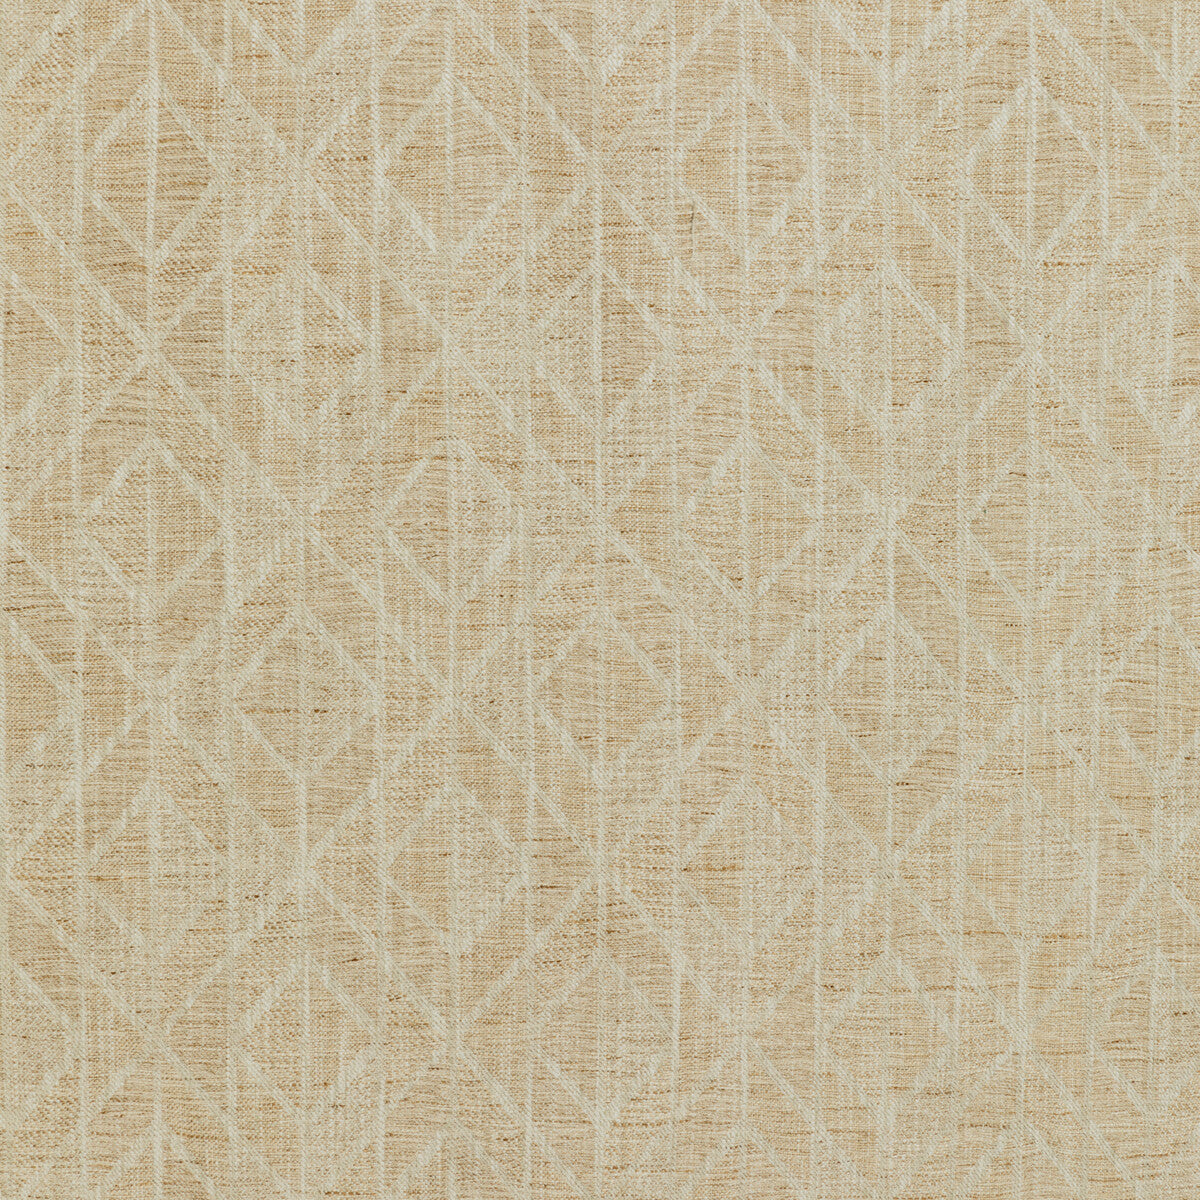 Kravet Design fabric in 36285-16 color - pattern 36285.16.0 - by Kravet Design in the Woven Colors collection